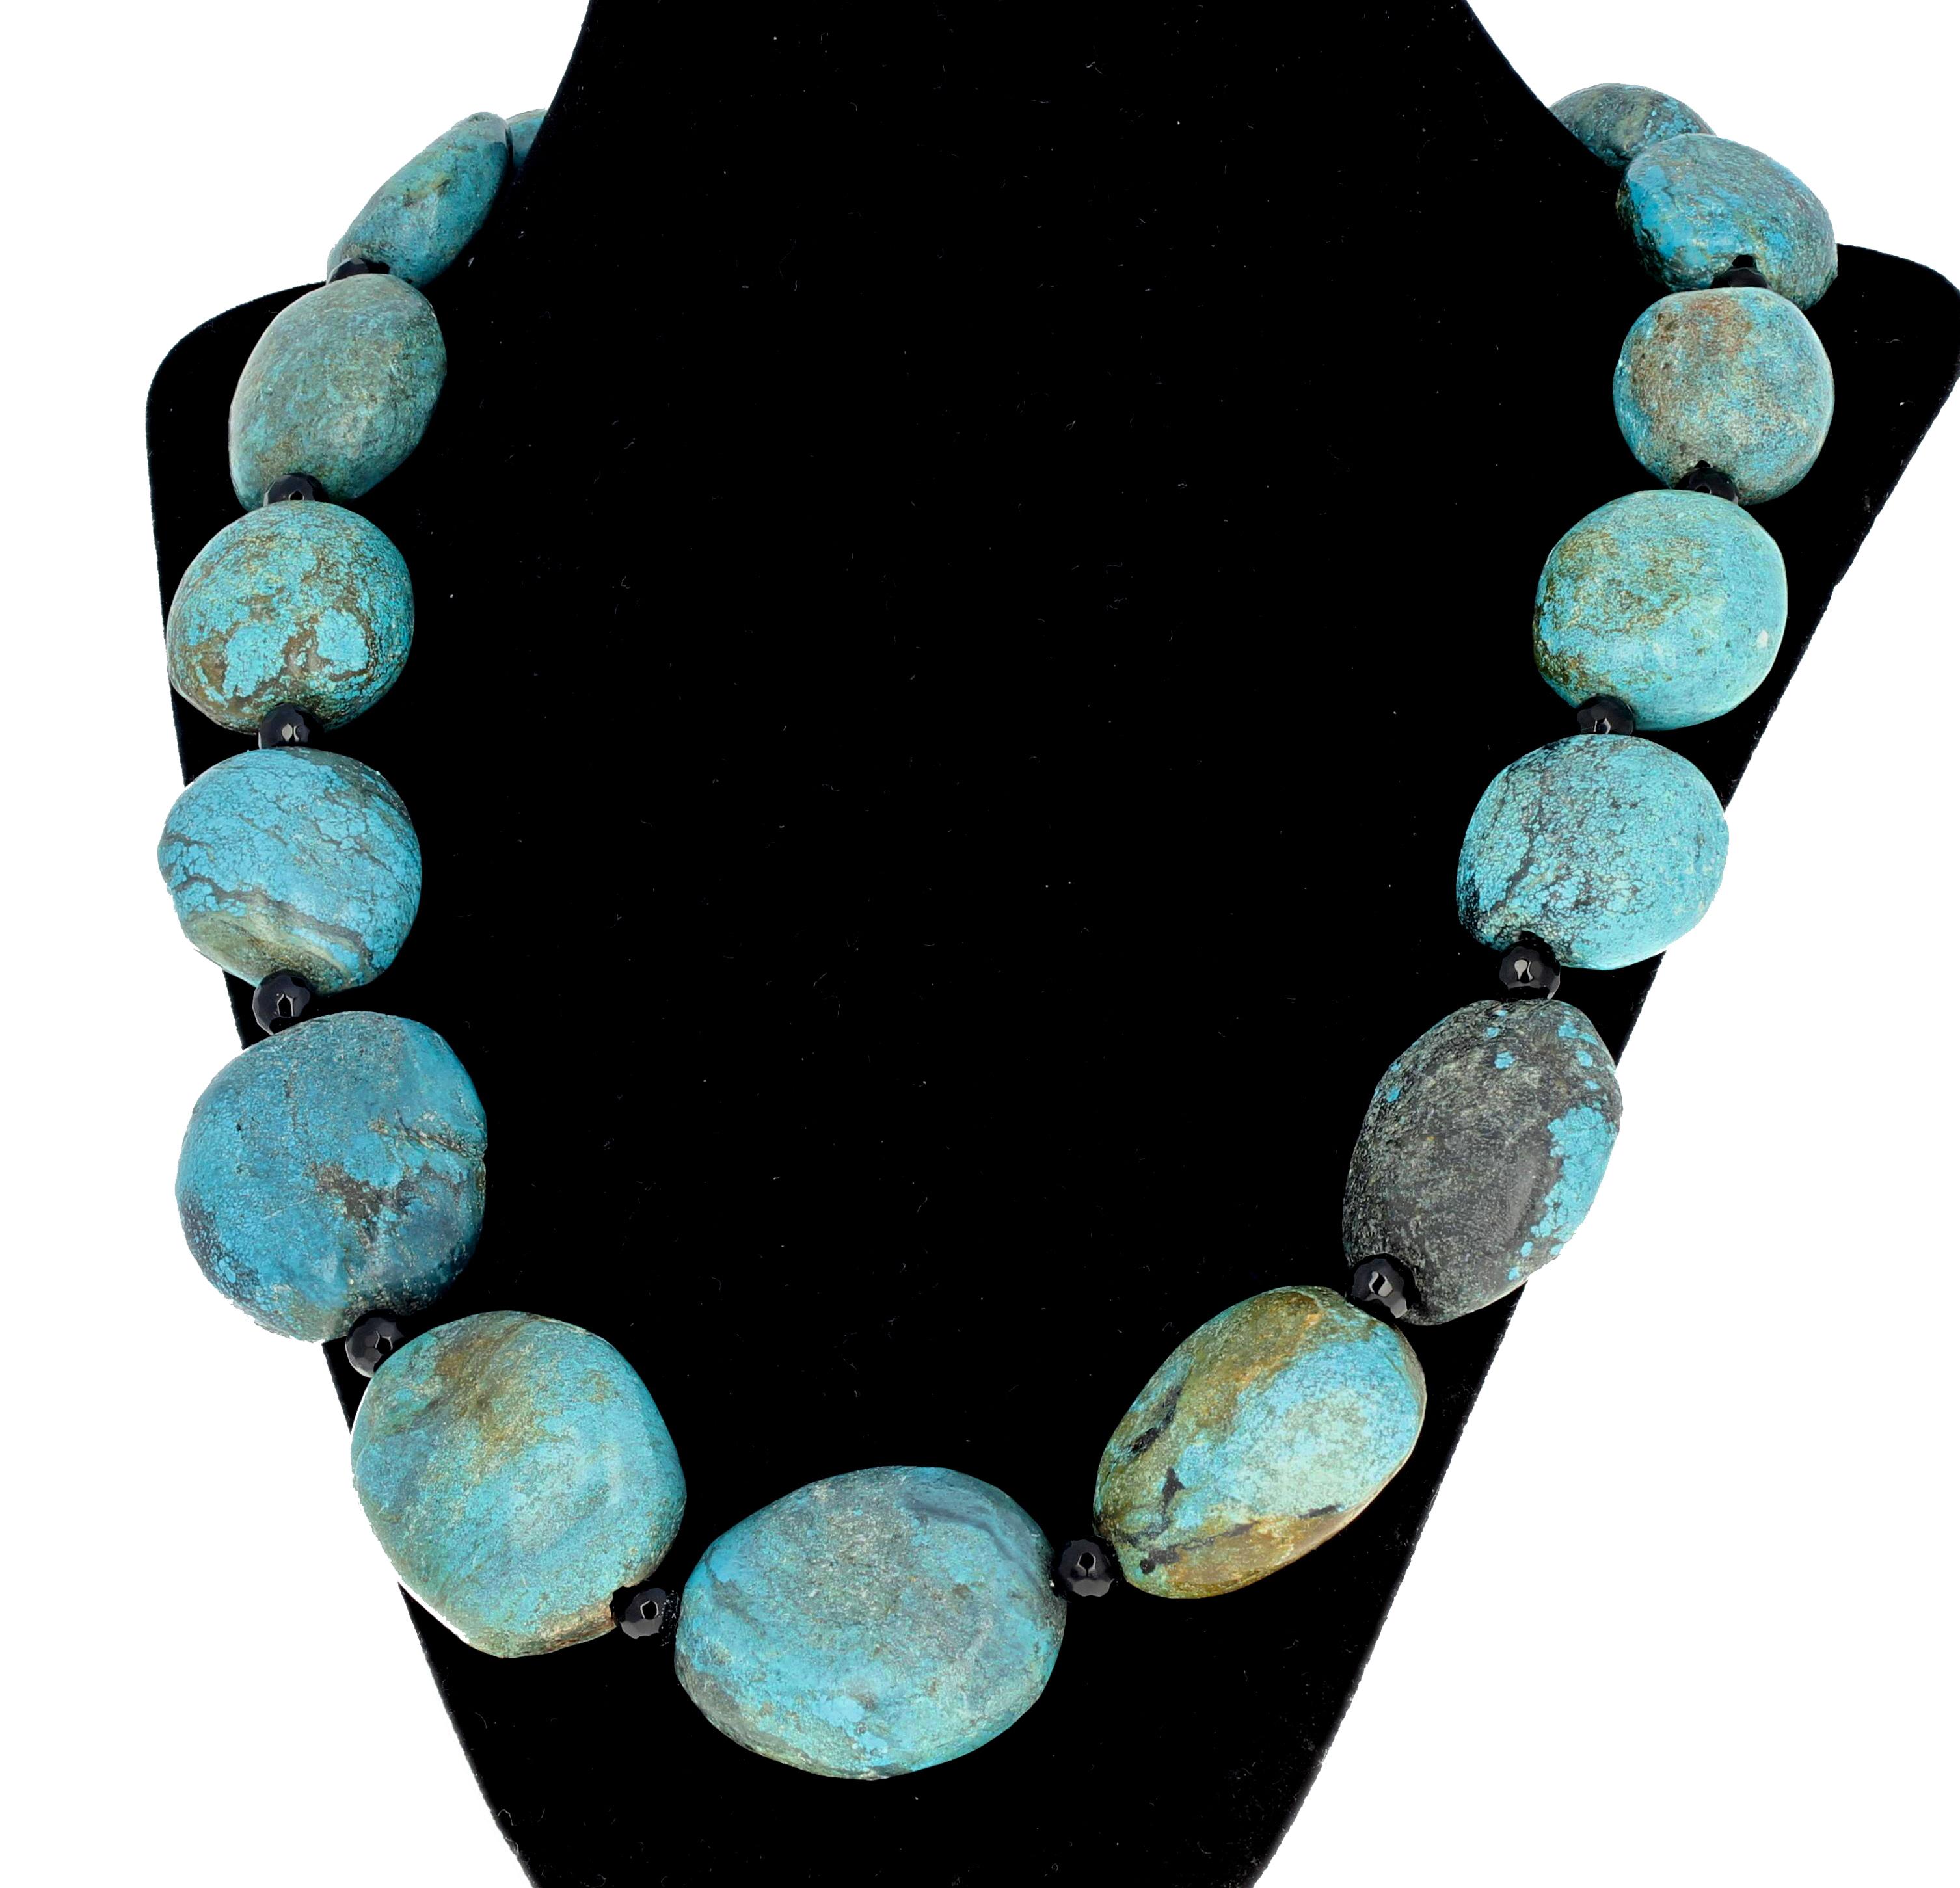 Polished chunks of soft blue natural rare Yai Turquoise rocks enhanced with checkerboard cut gemmy black sparkling Spinel spacers. This measures 23 inches long and the clasp is silver tone hook. 